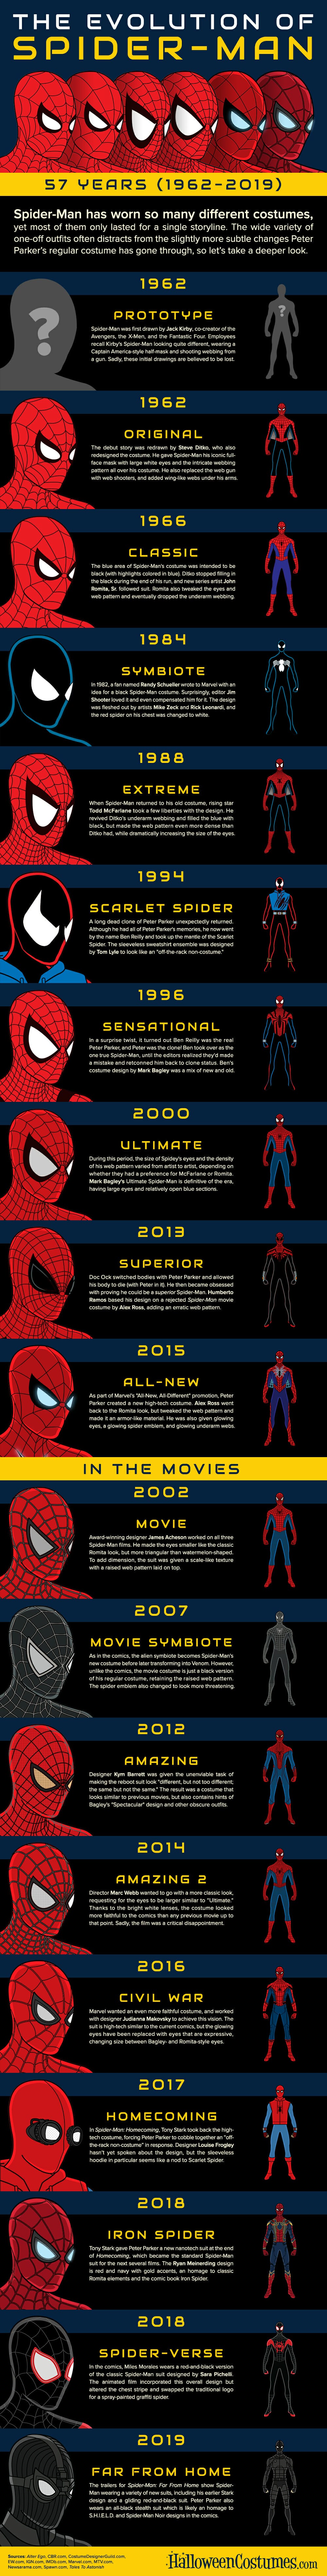 57 years of different Spider-man costumes